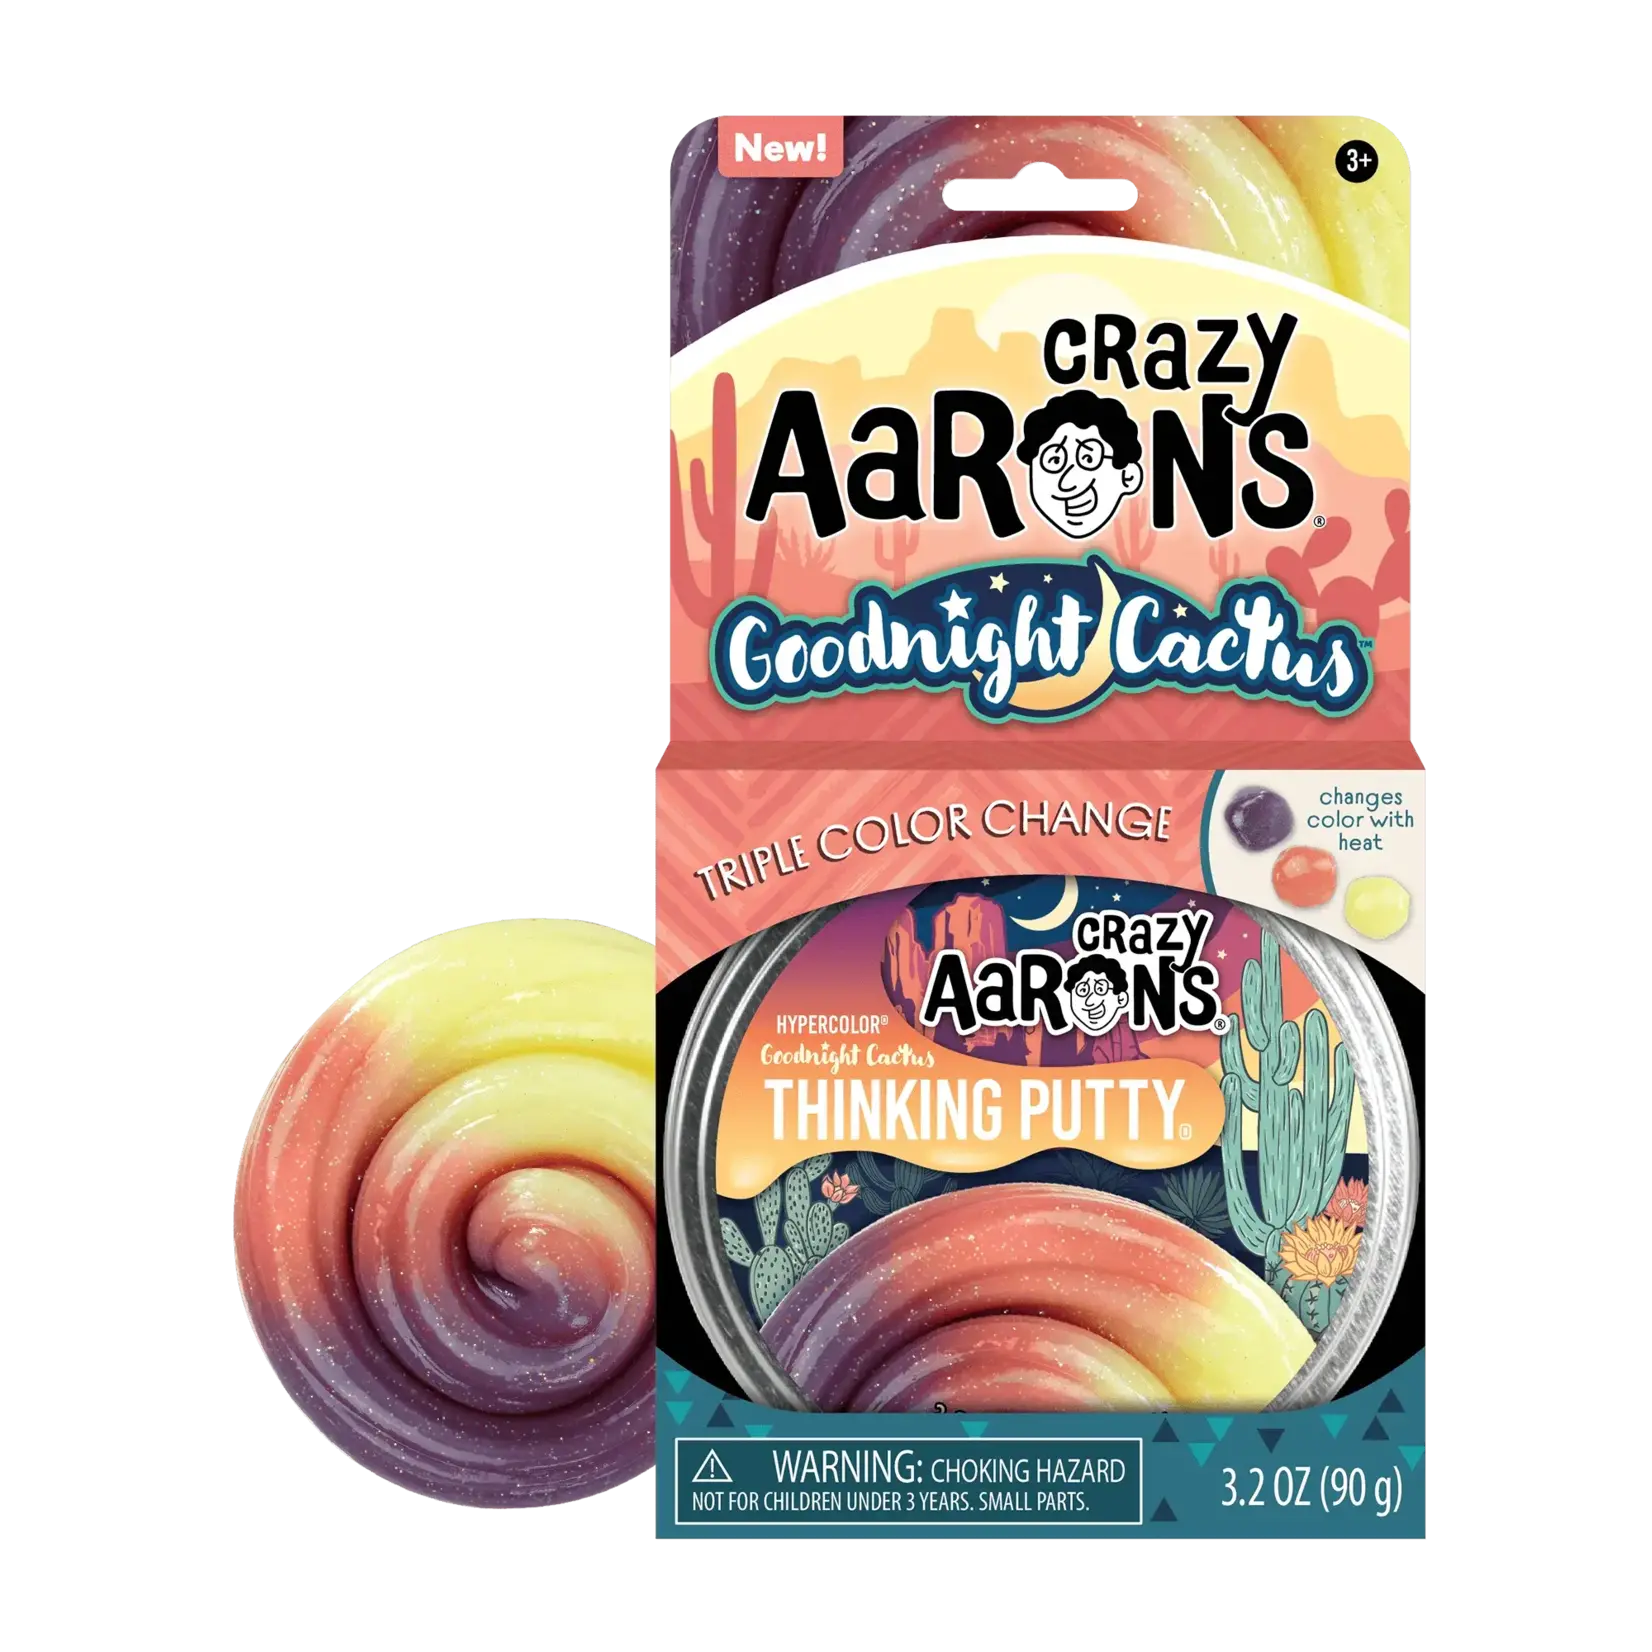 Crazy Aarons Crazy Aaron's Thinking Putty® – Goodnight Cactus (4")